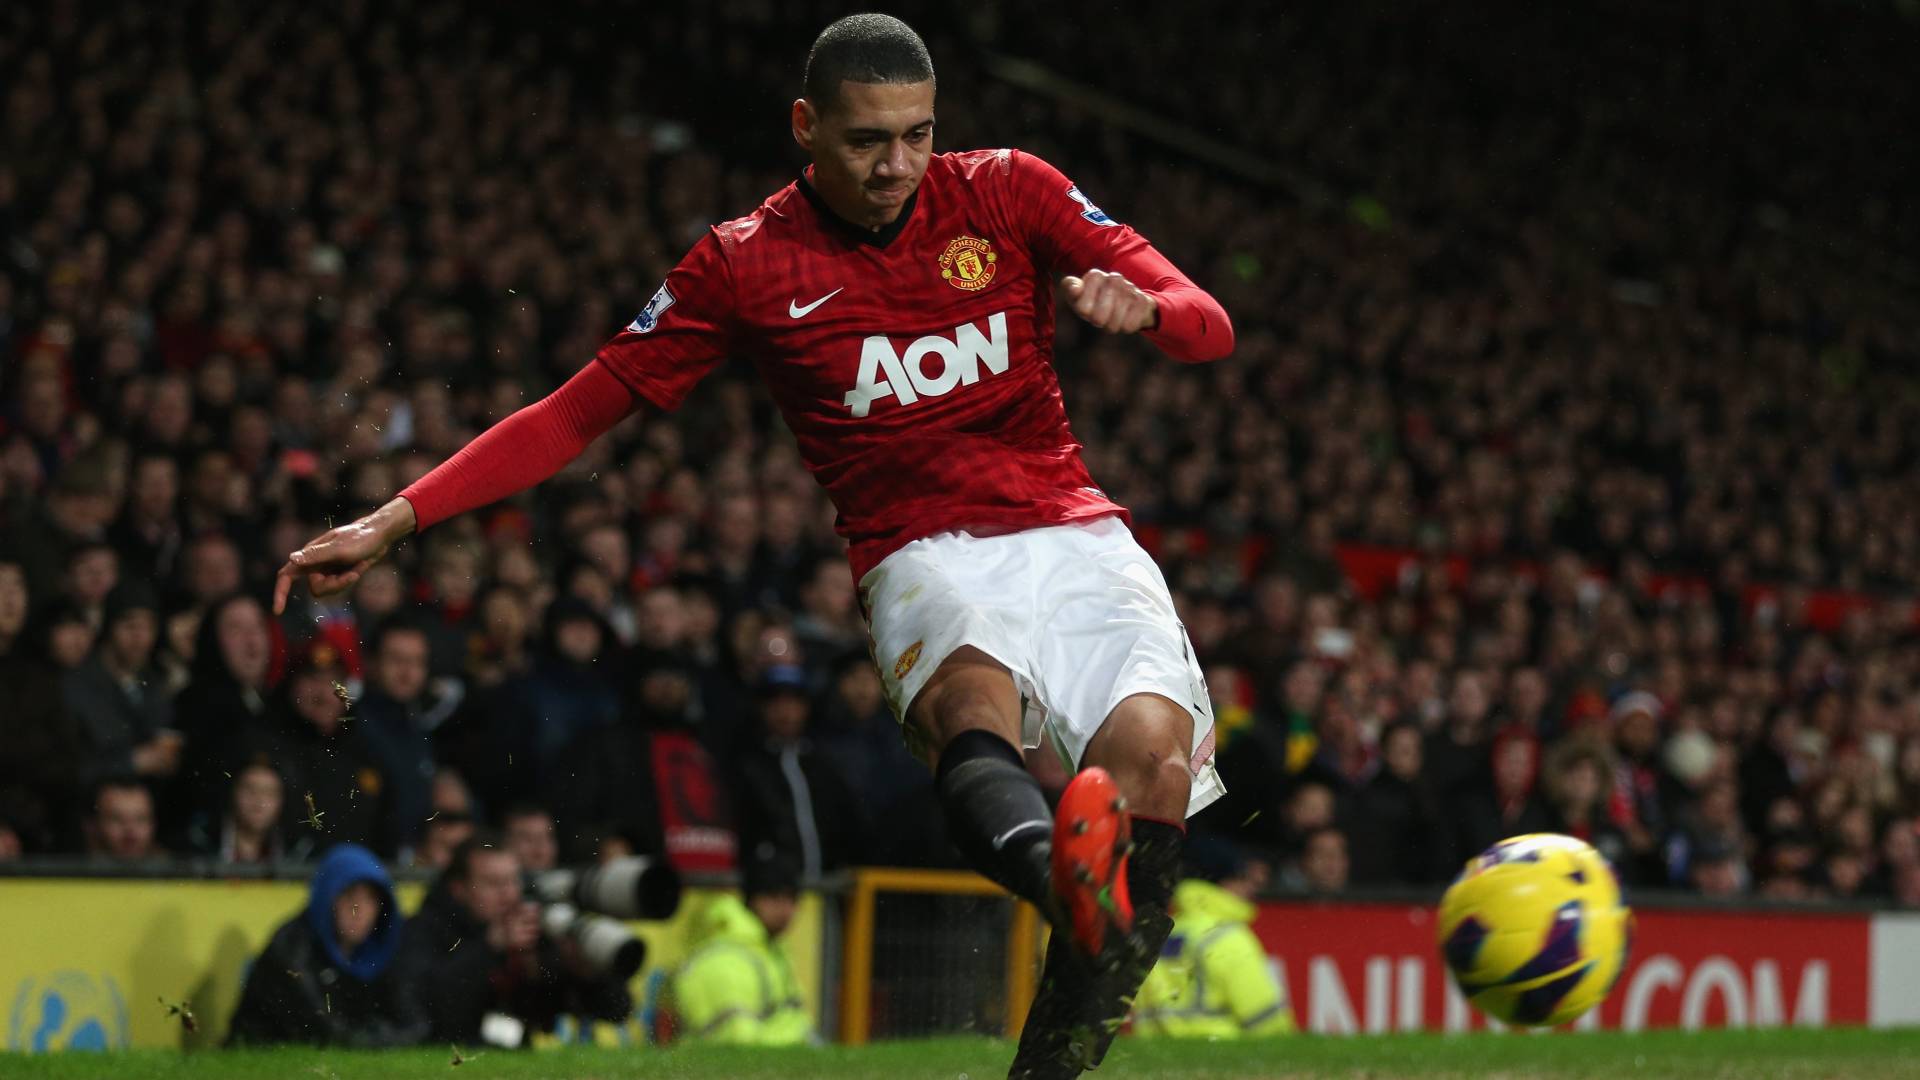 Chris Smalling Manchester United 2012/13